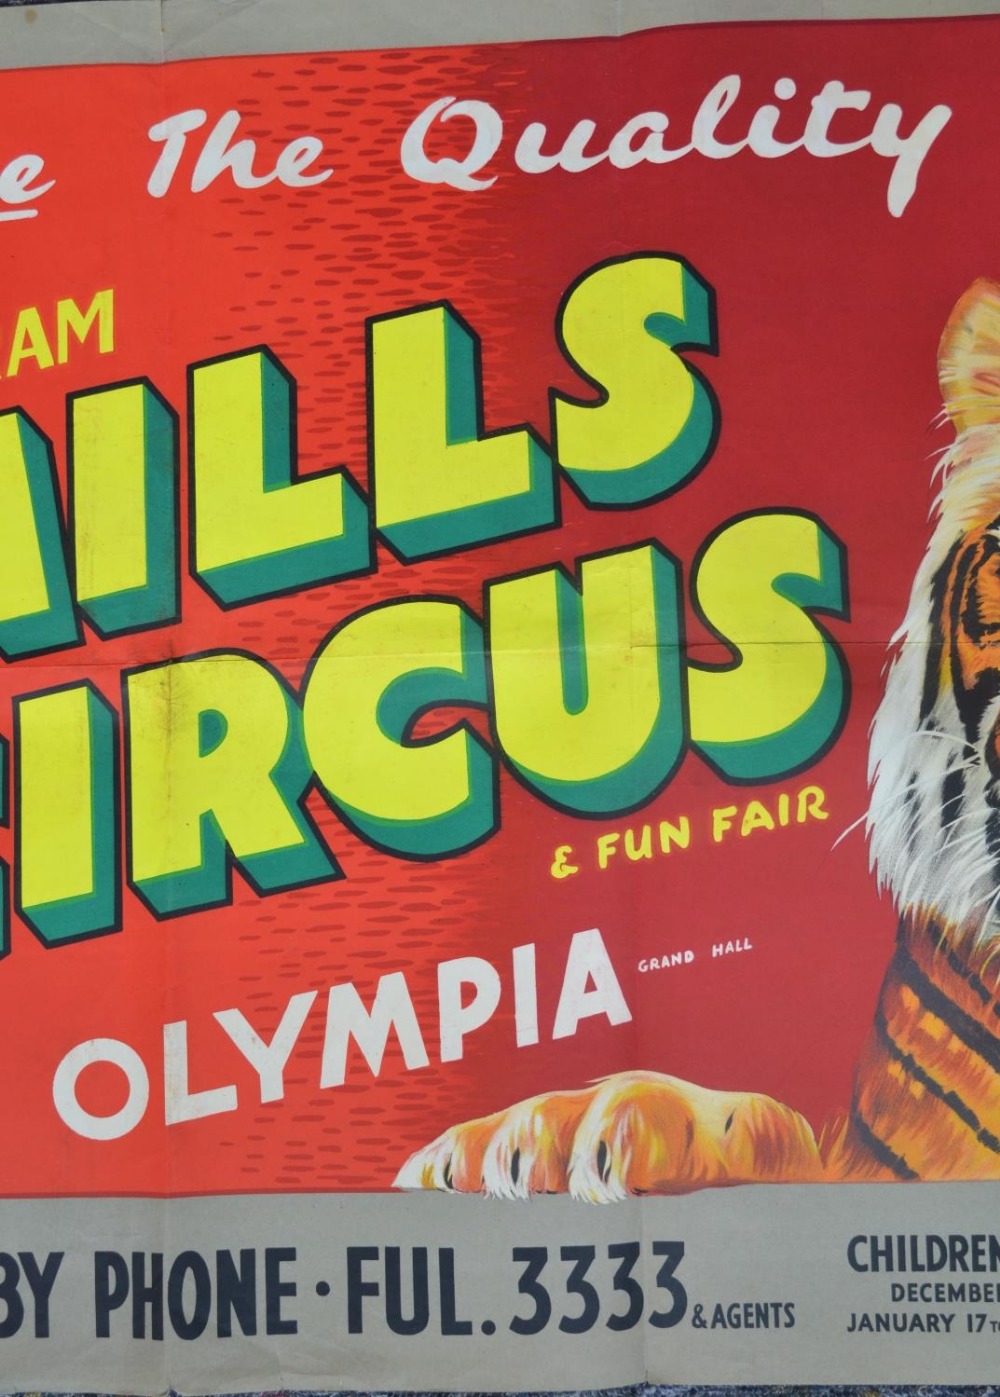 Unframed original vintage W.E.Berry event poster for Bertram Mills Circus And Fun Fair, Olympia - Image 4 of 7